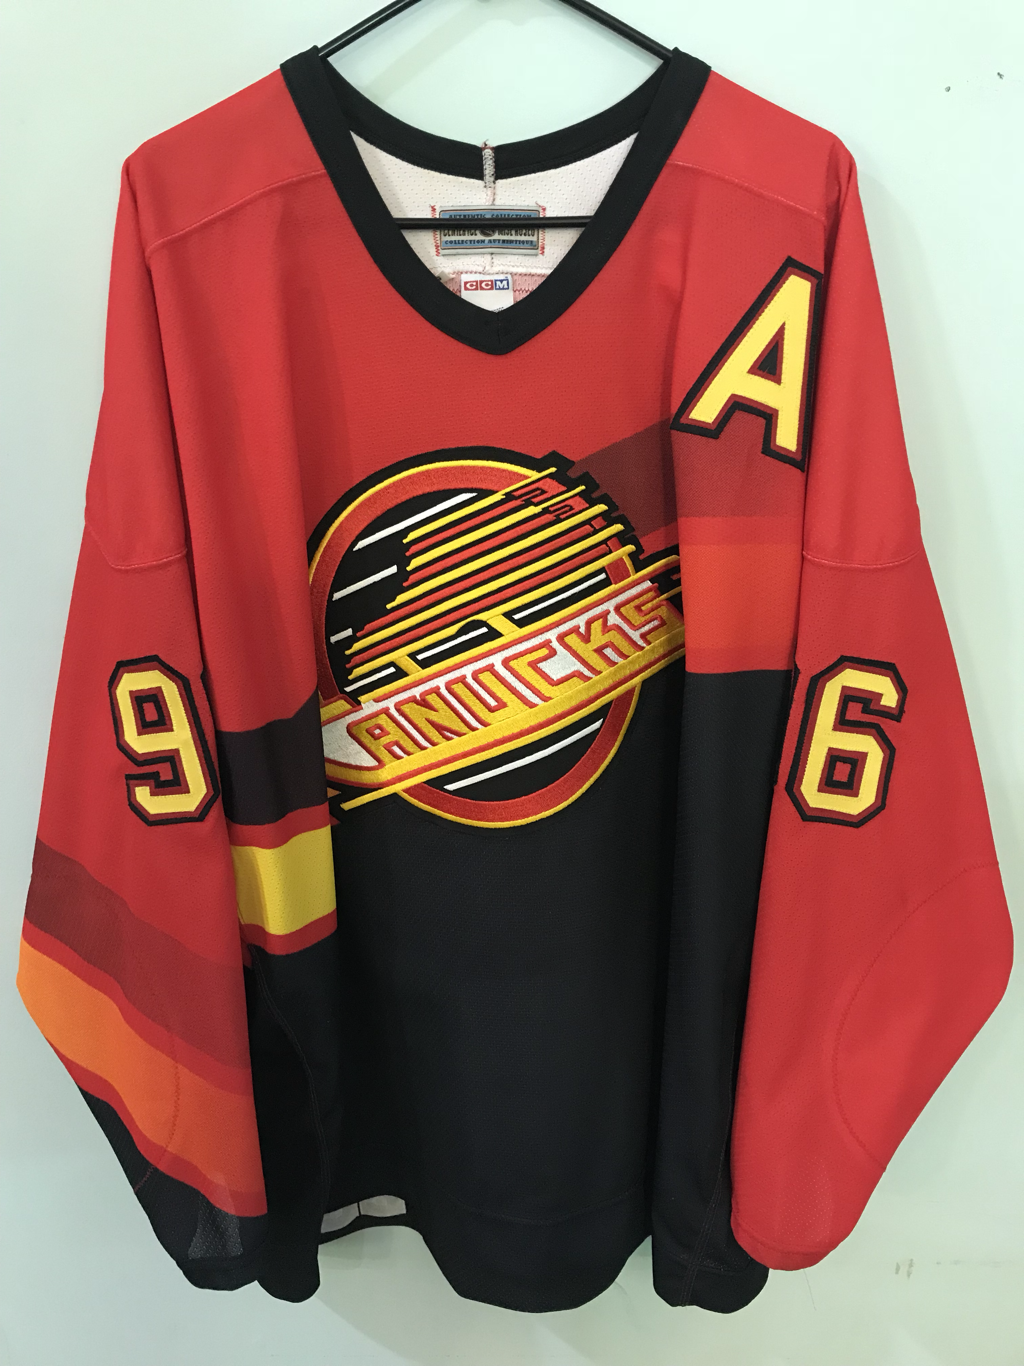 canucks red jersey